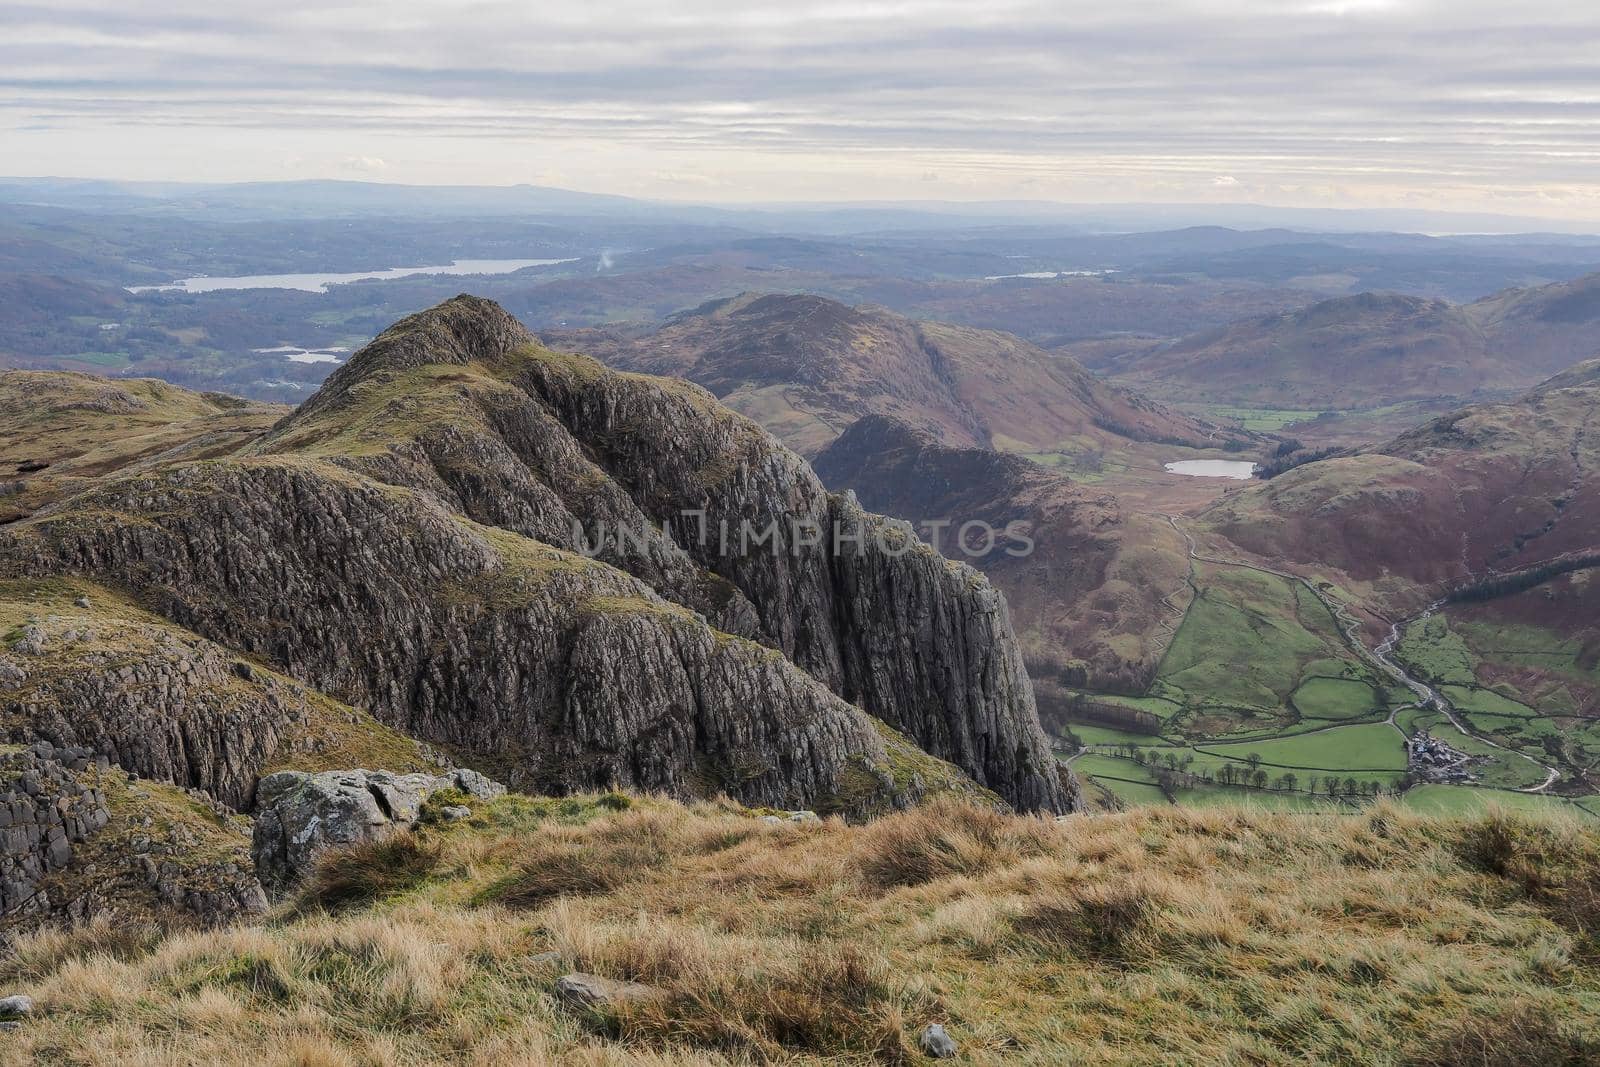 View to Loft Crag from Pike of Stickle overlooking the Great Langdale valley with Blea Tarn nestled in the fells and Windermere lake in the background, Langdale Pikes, Lake District, UK